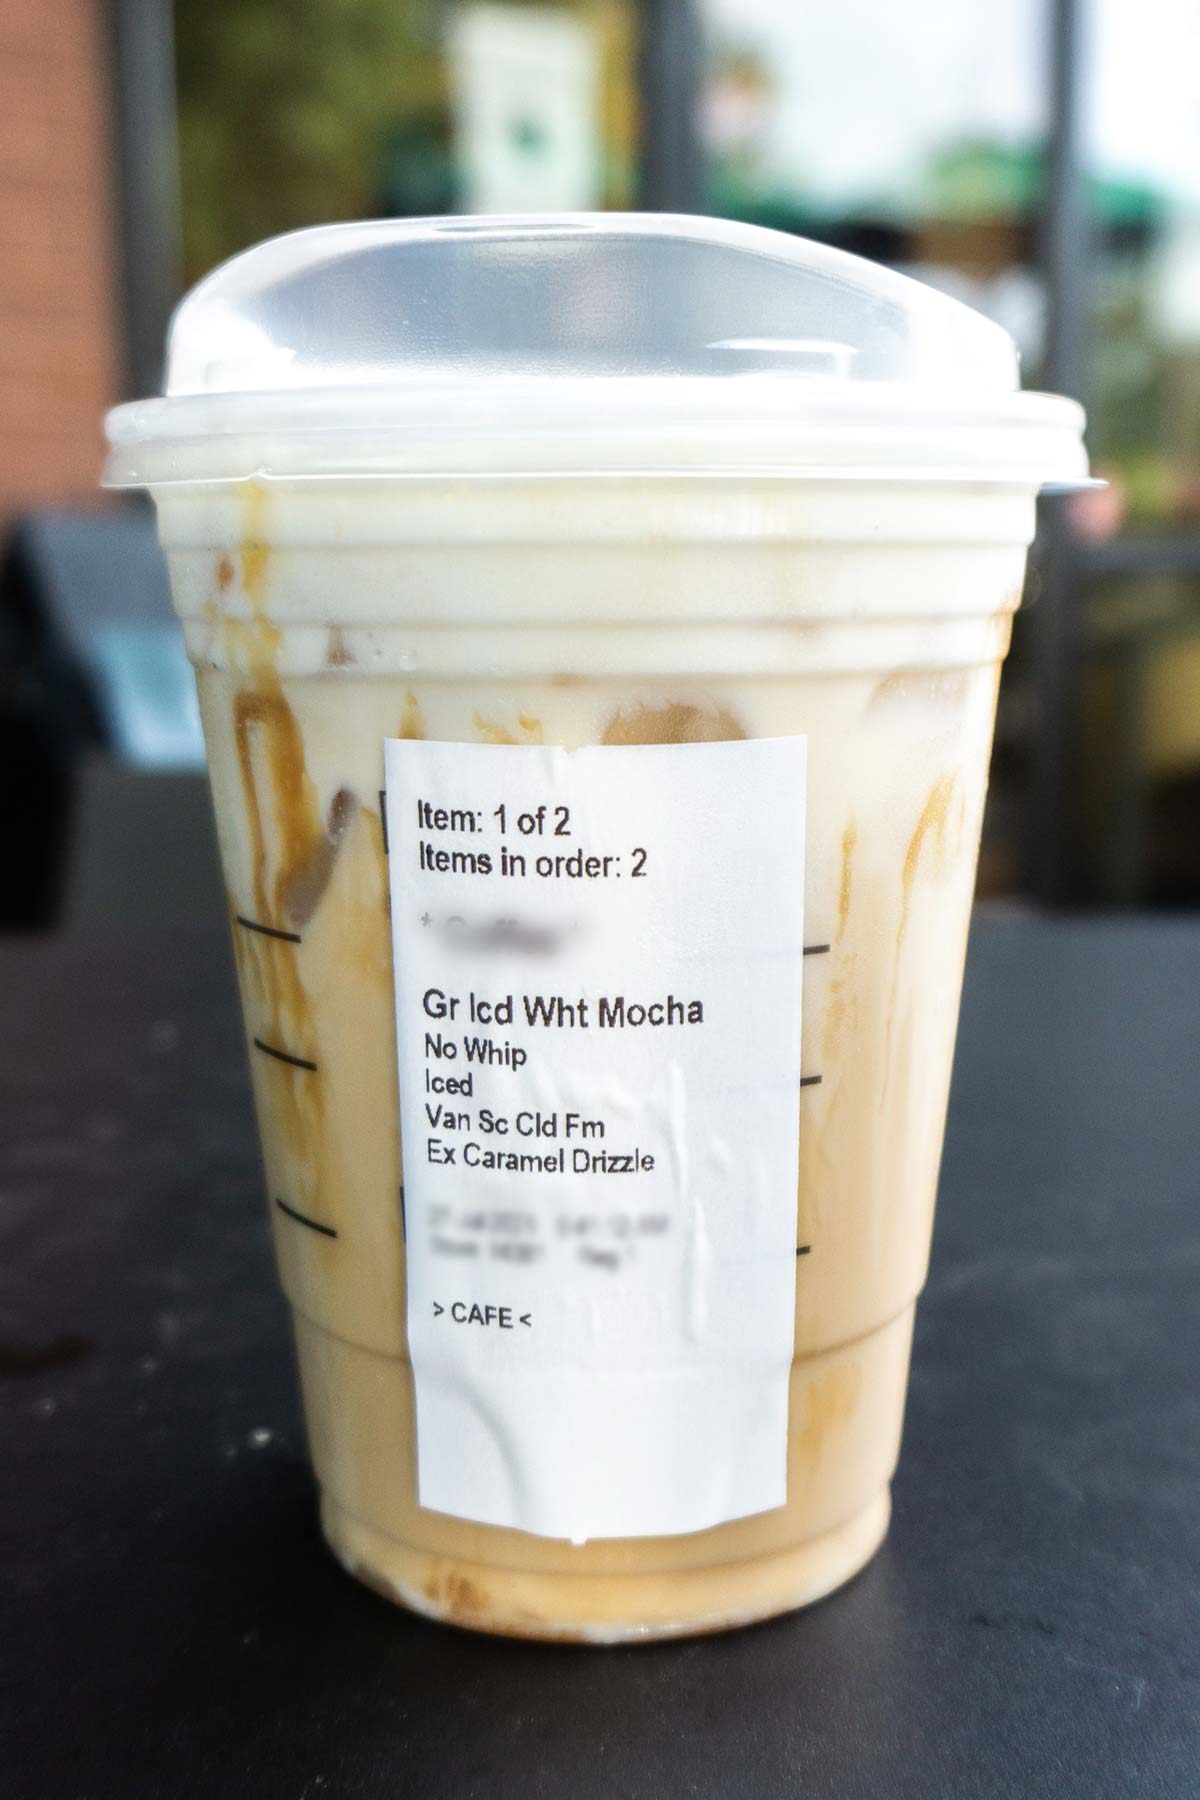 Starbucks drink Iced White Mocha with Sweet Cream Foam and extra caramel drizzle in a plastic cup.